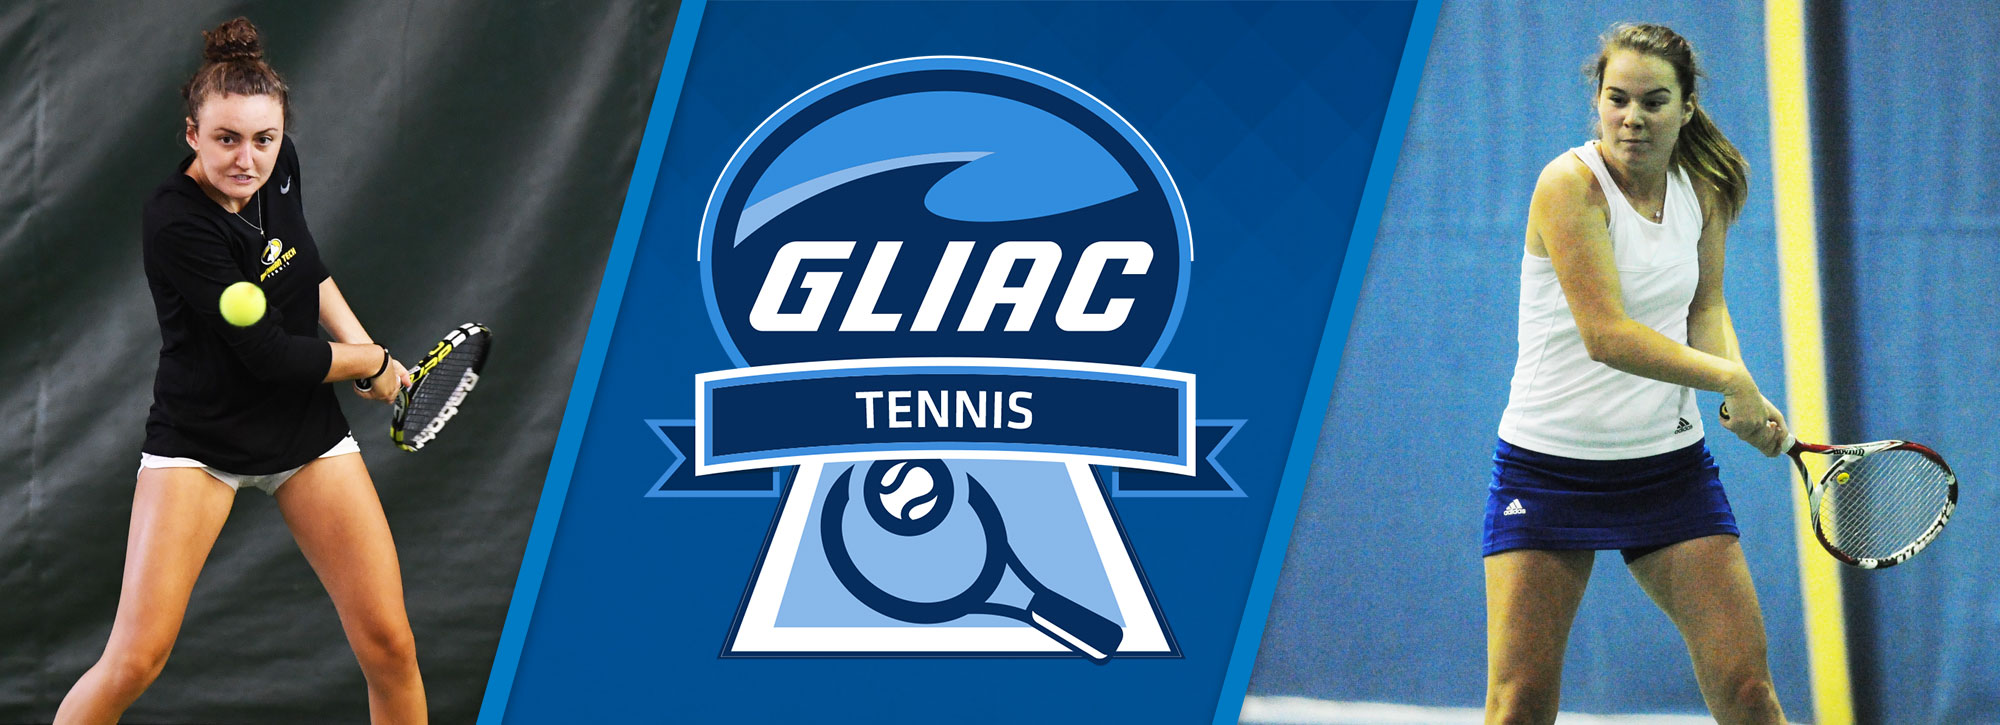 Lake State's Drouin Named Player of the Year; 2017 GLIAC Women's Tennis Awards Announced